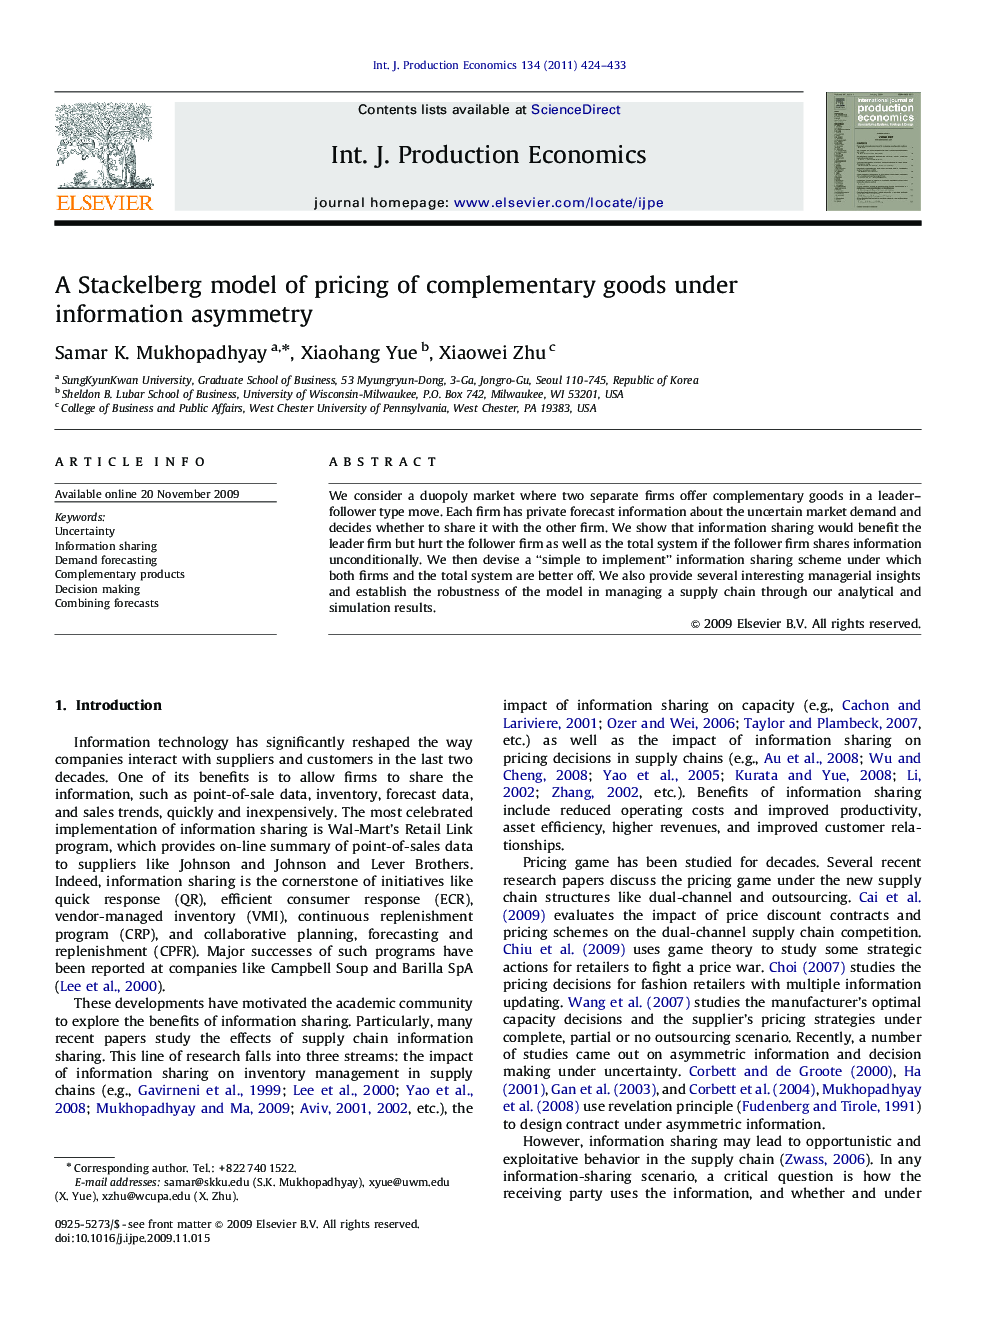 A Stackelberg model of pricing of complementary goods under information asymmetry